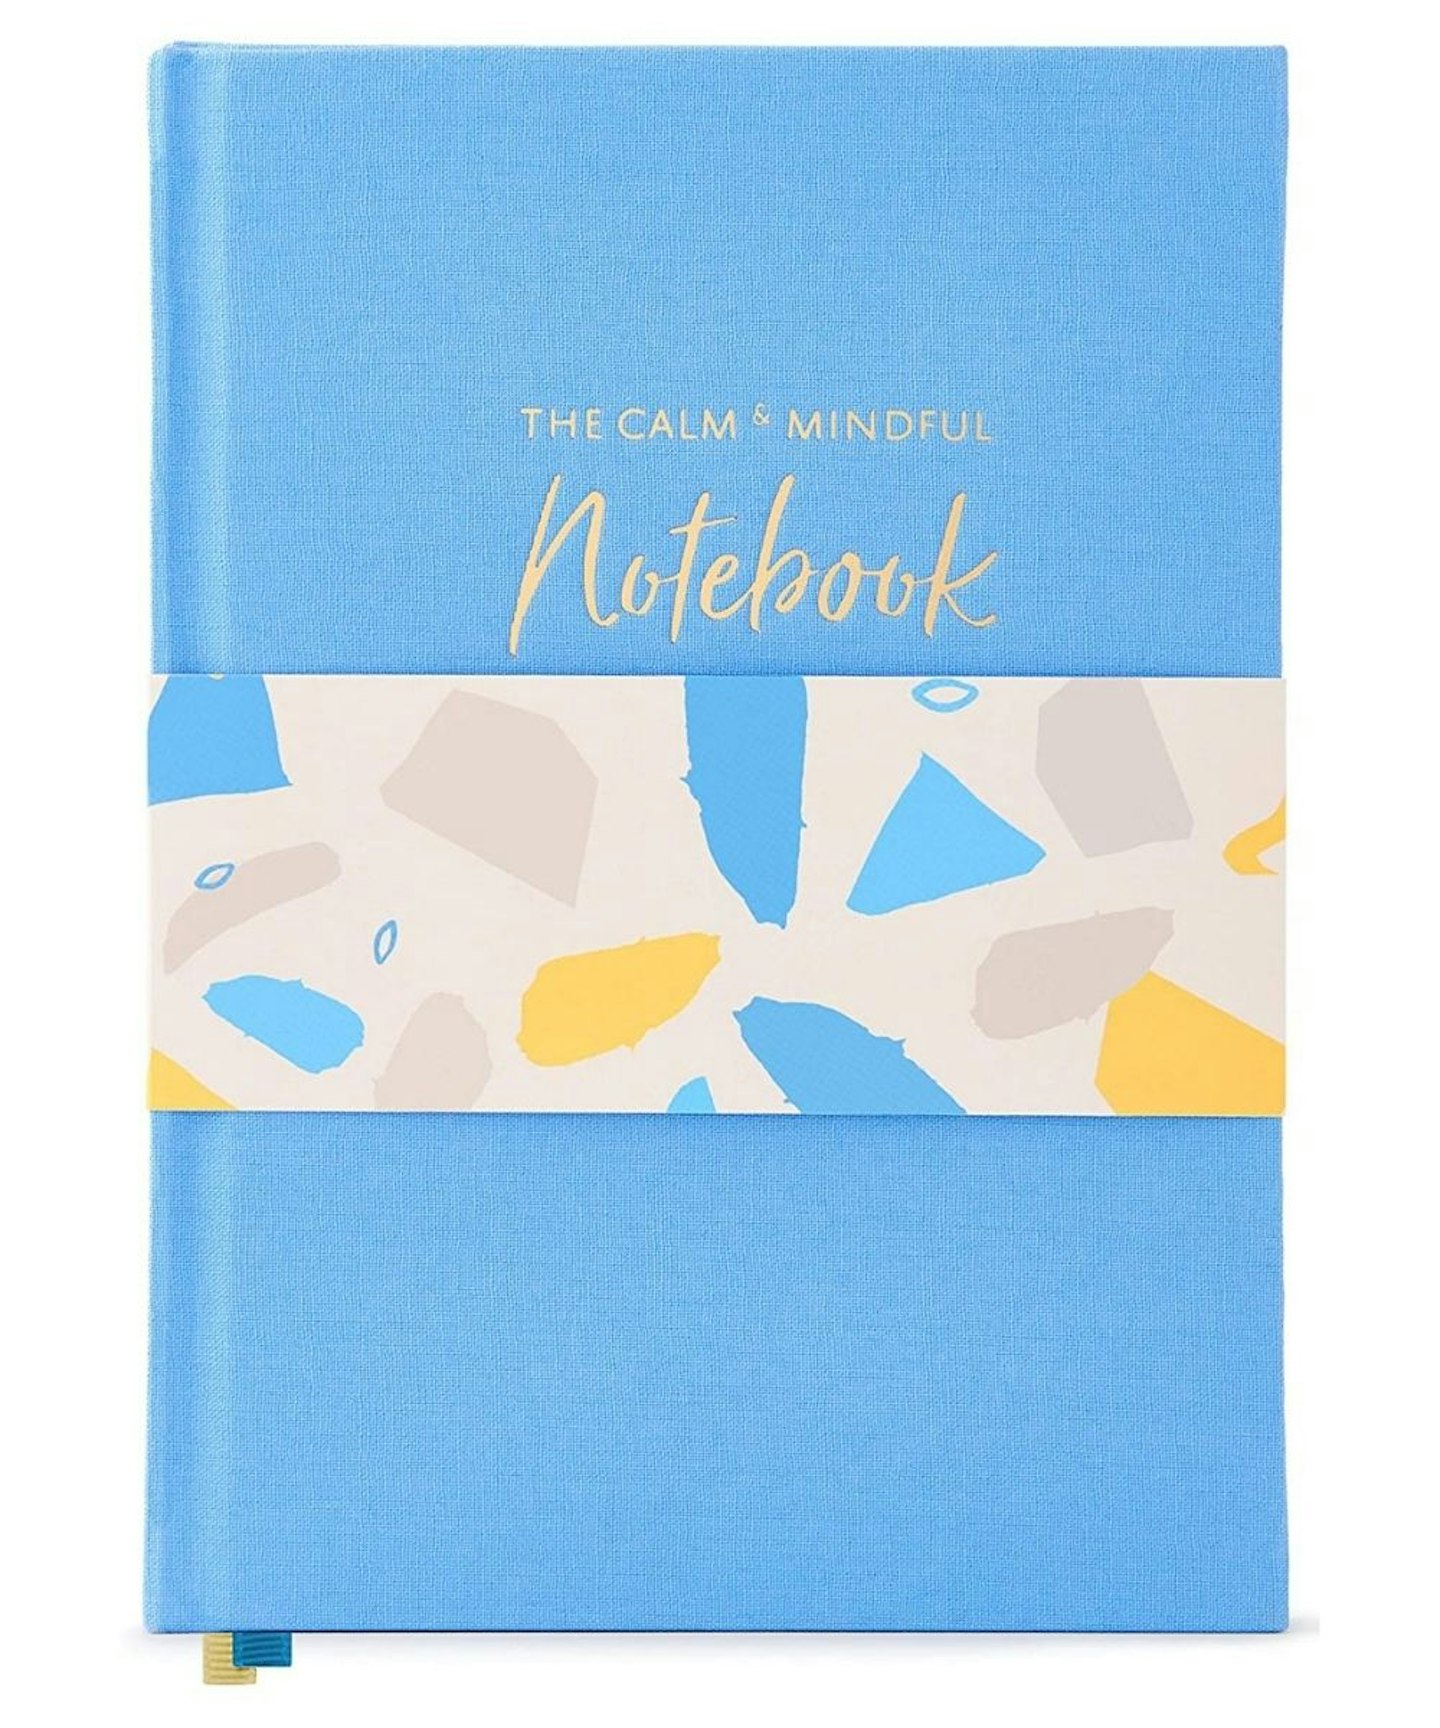 The Calm & Mindful Notebook – Guided Self Care Journal